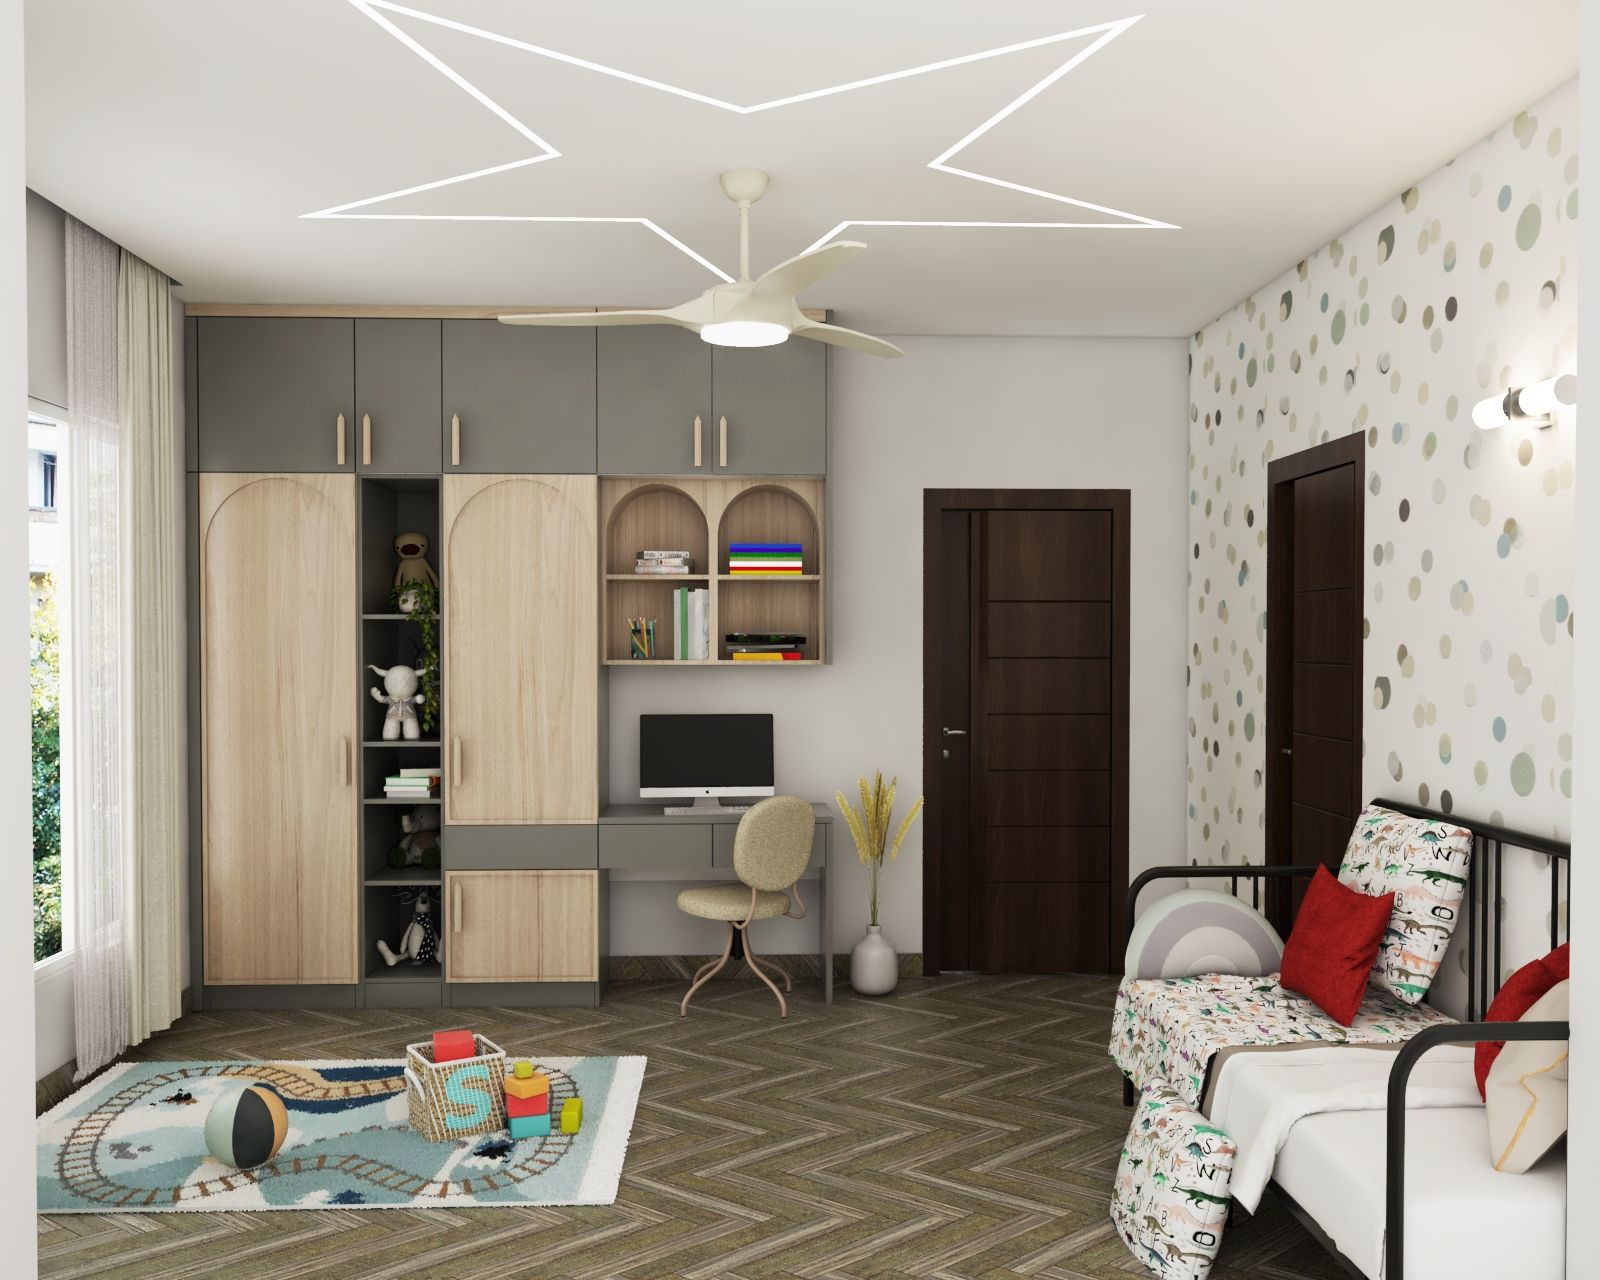 Contemporary Kids Bedroom Design With A Sofa-Cum-Bed